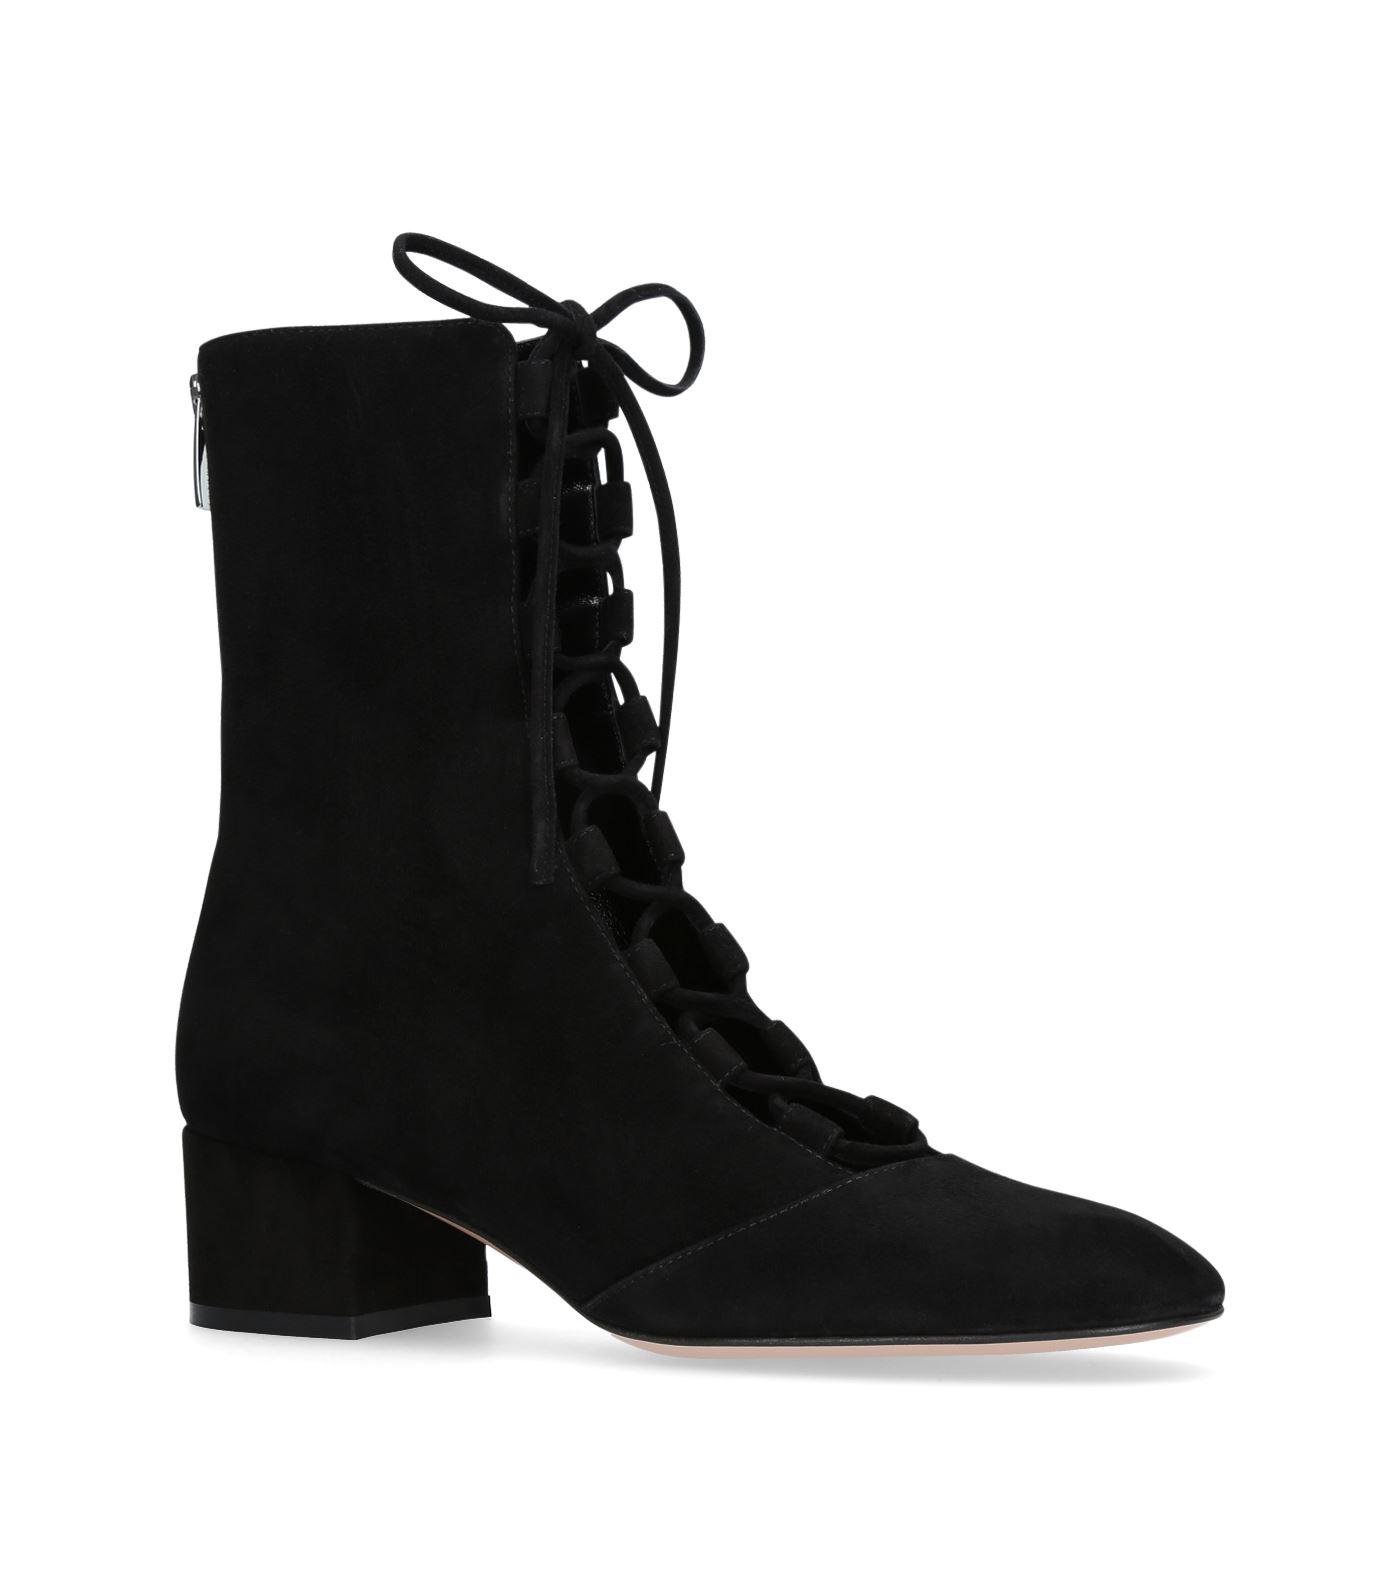 Gianvito Rossi Suede Delia Lace-up Ankle Boots in Black - Lyst